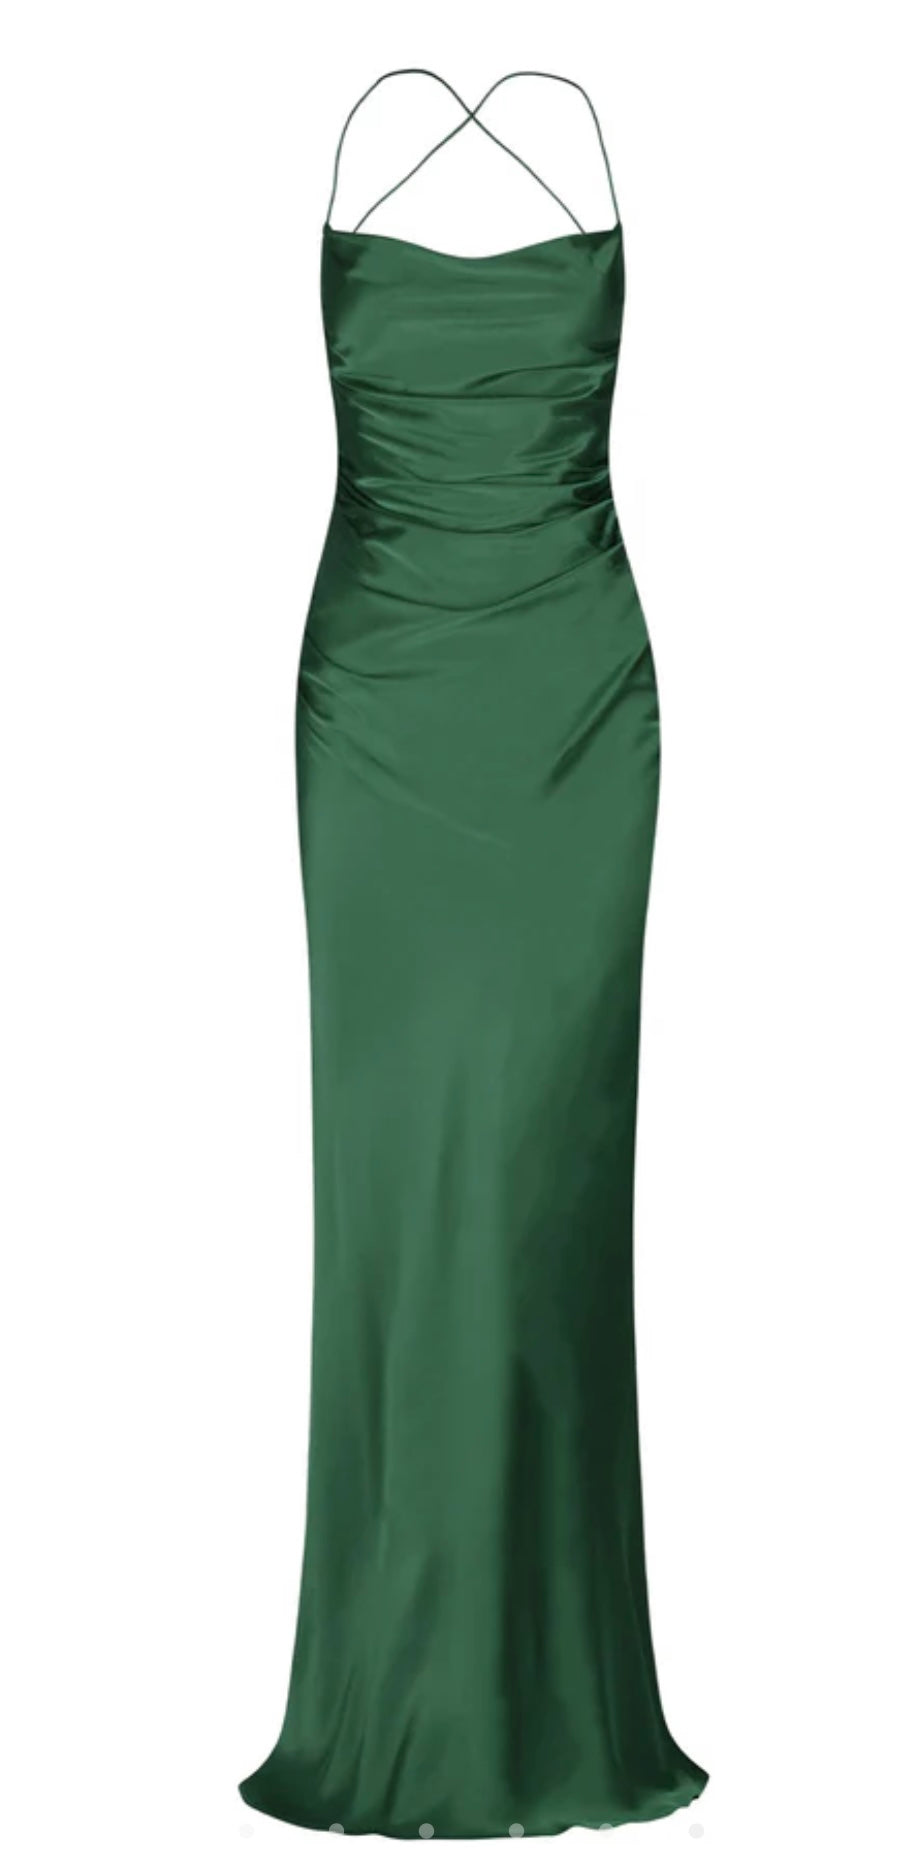 Shona Joy Angelica Maxi Dress in Basil Green front view on white background